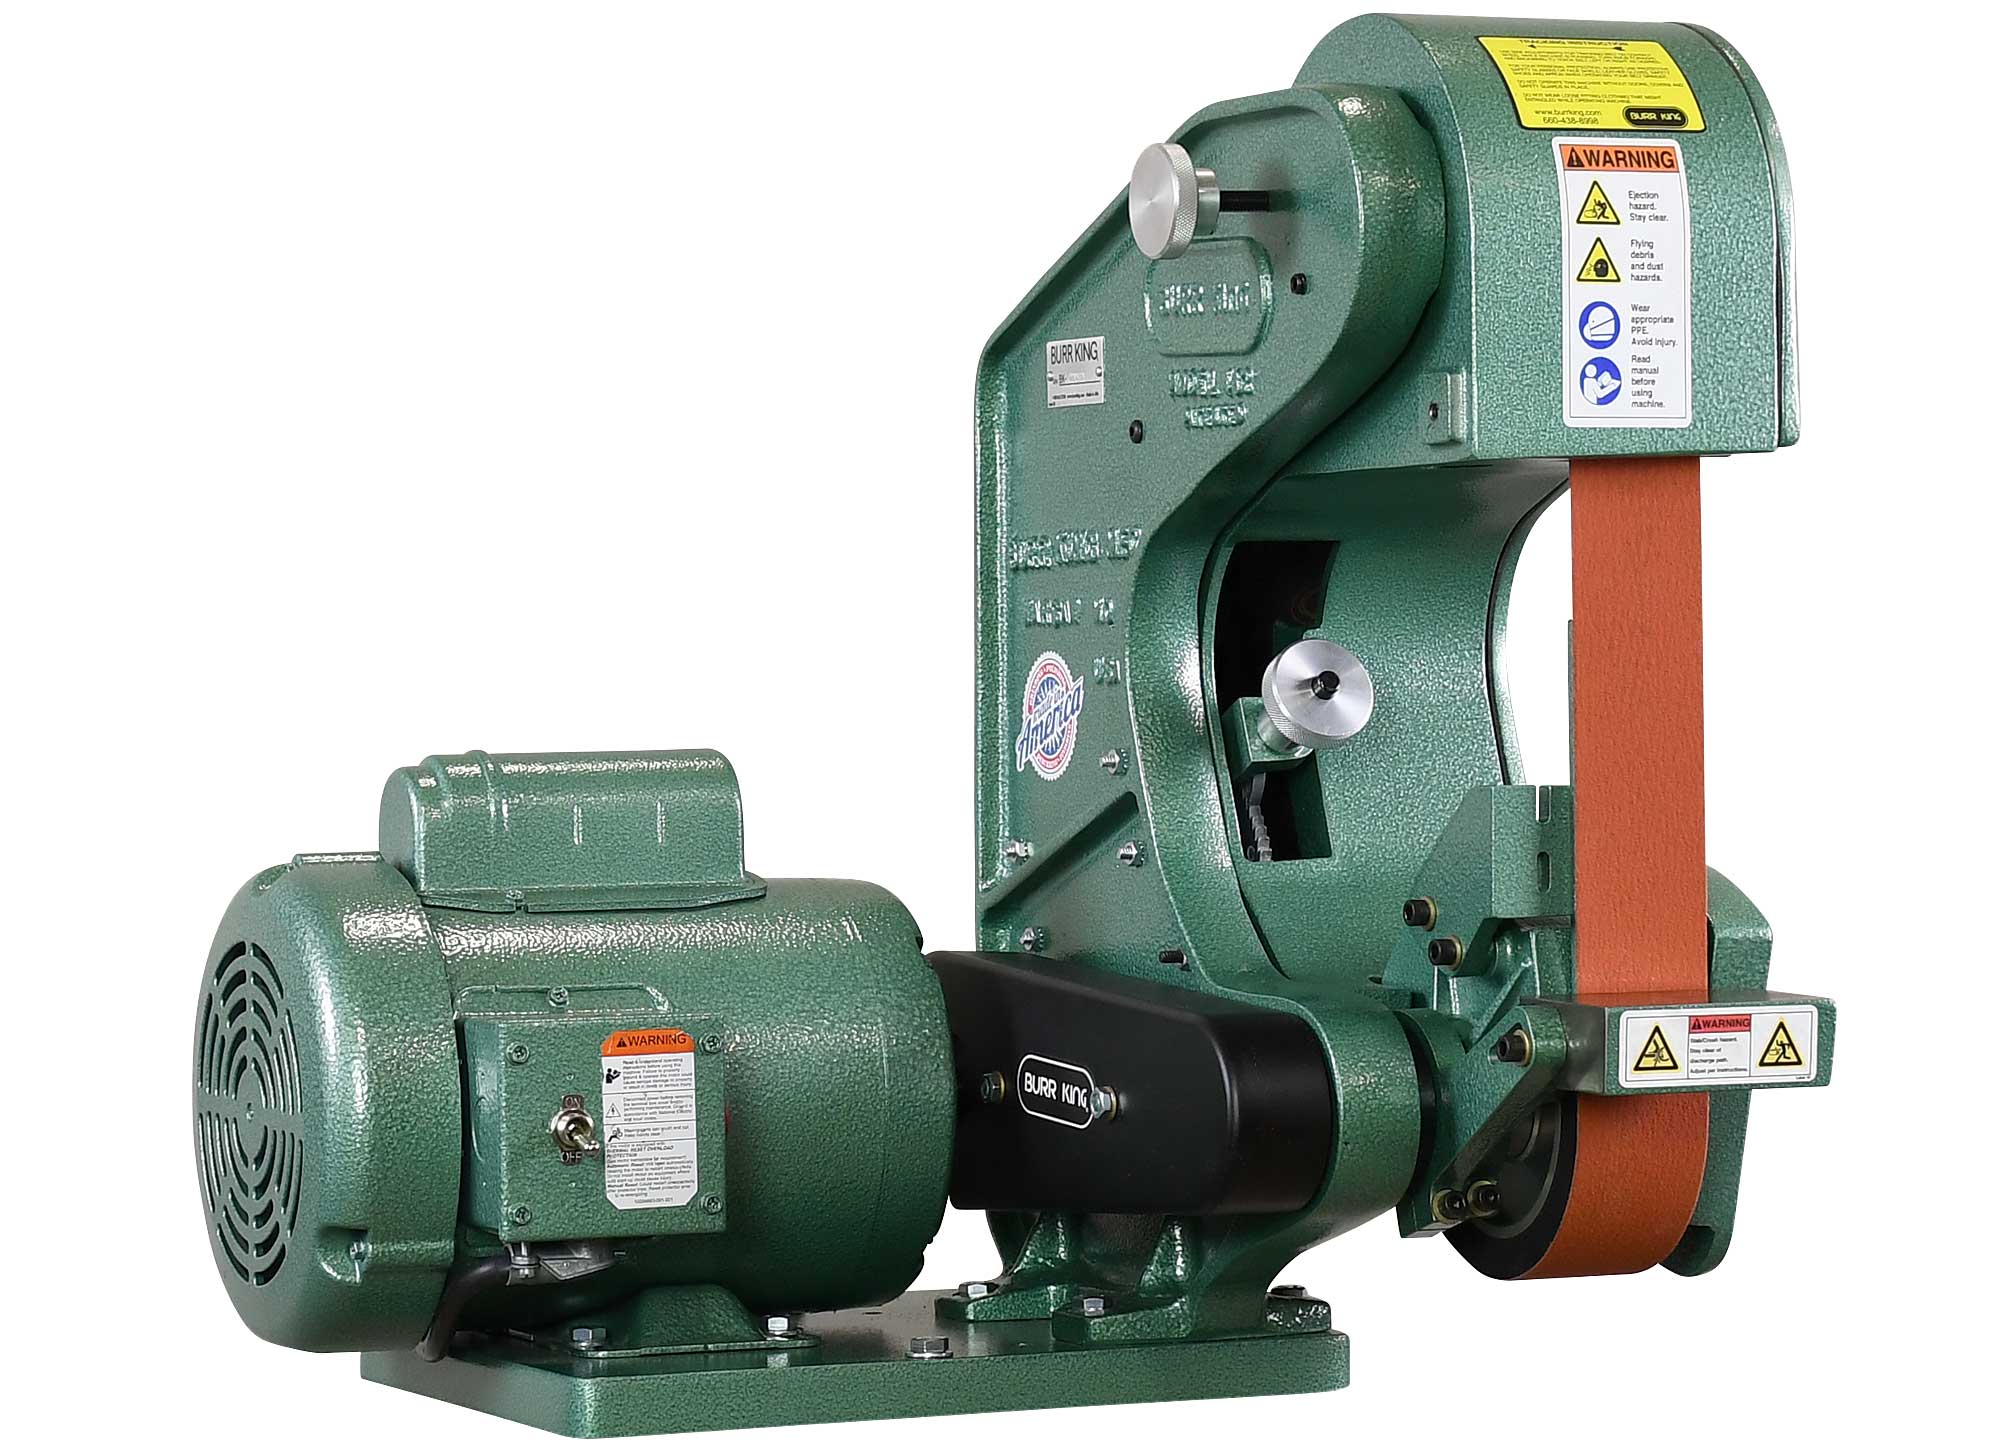 Model 482 three wheel belt grinder features a 2` x 48` . Stock code 40100 is shown